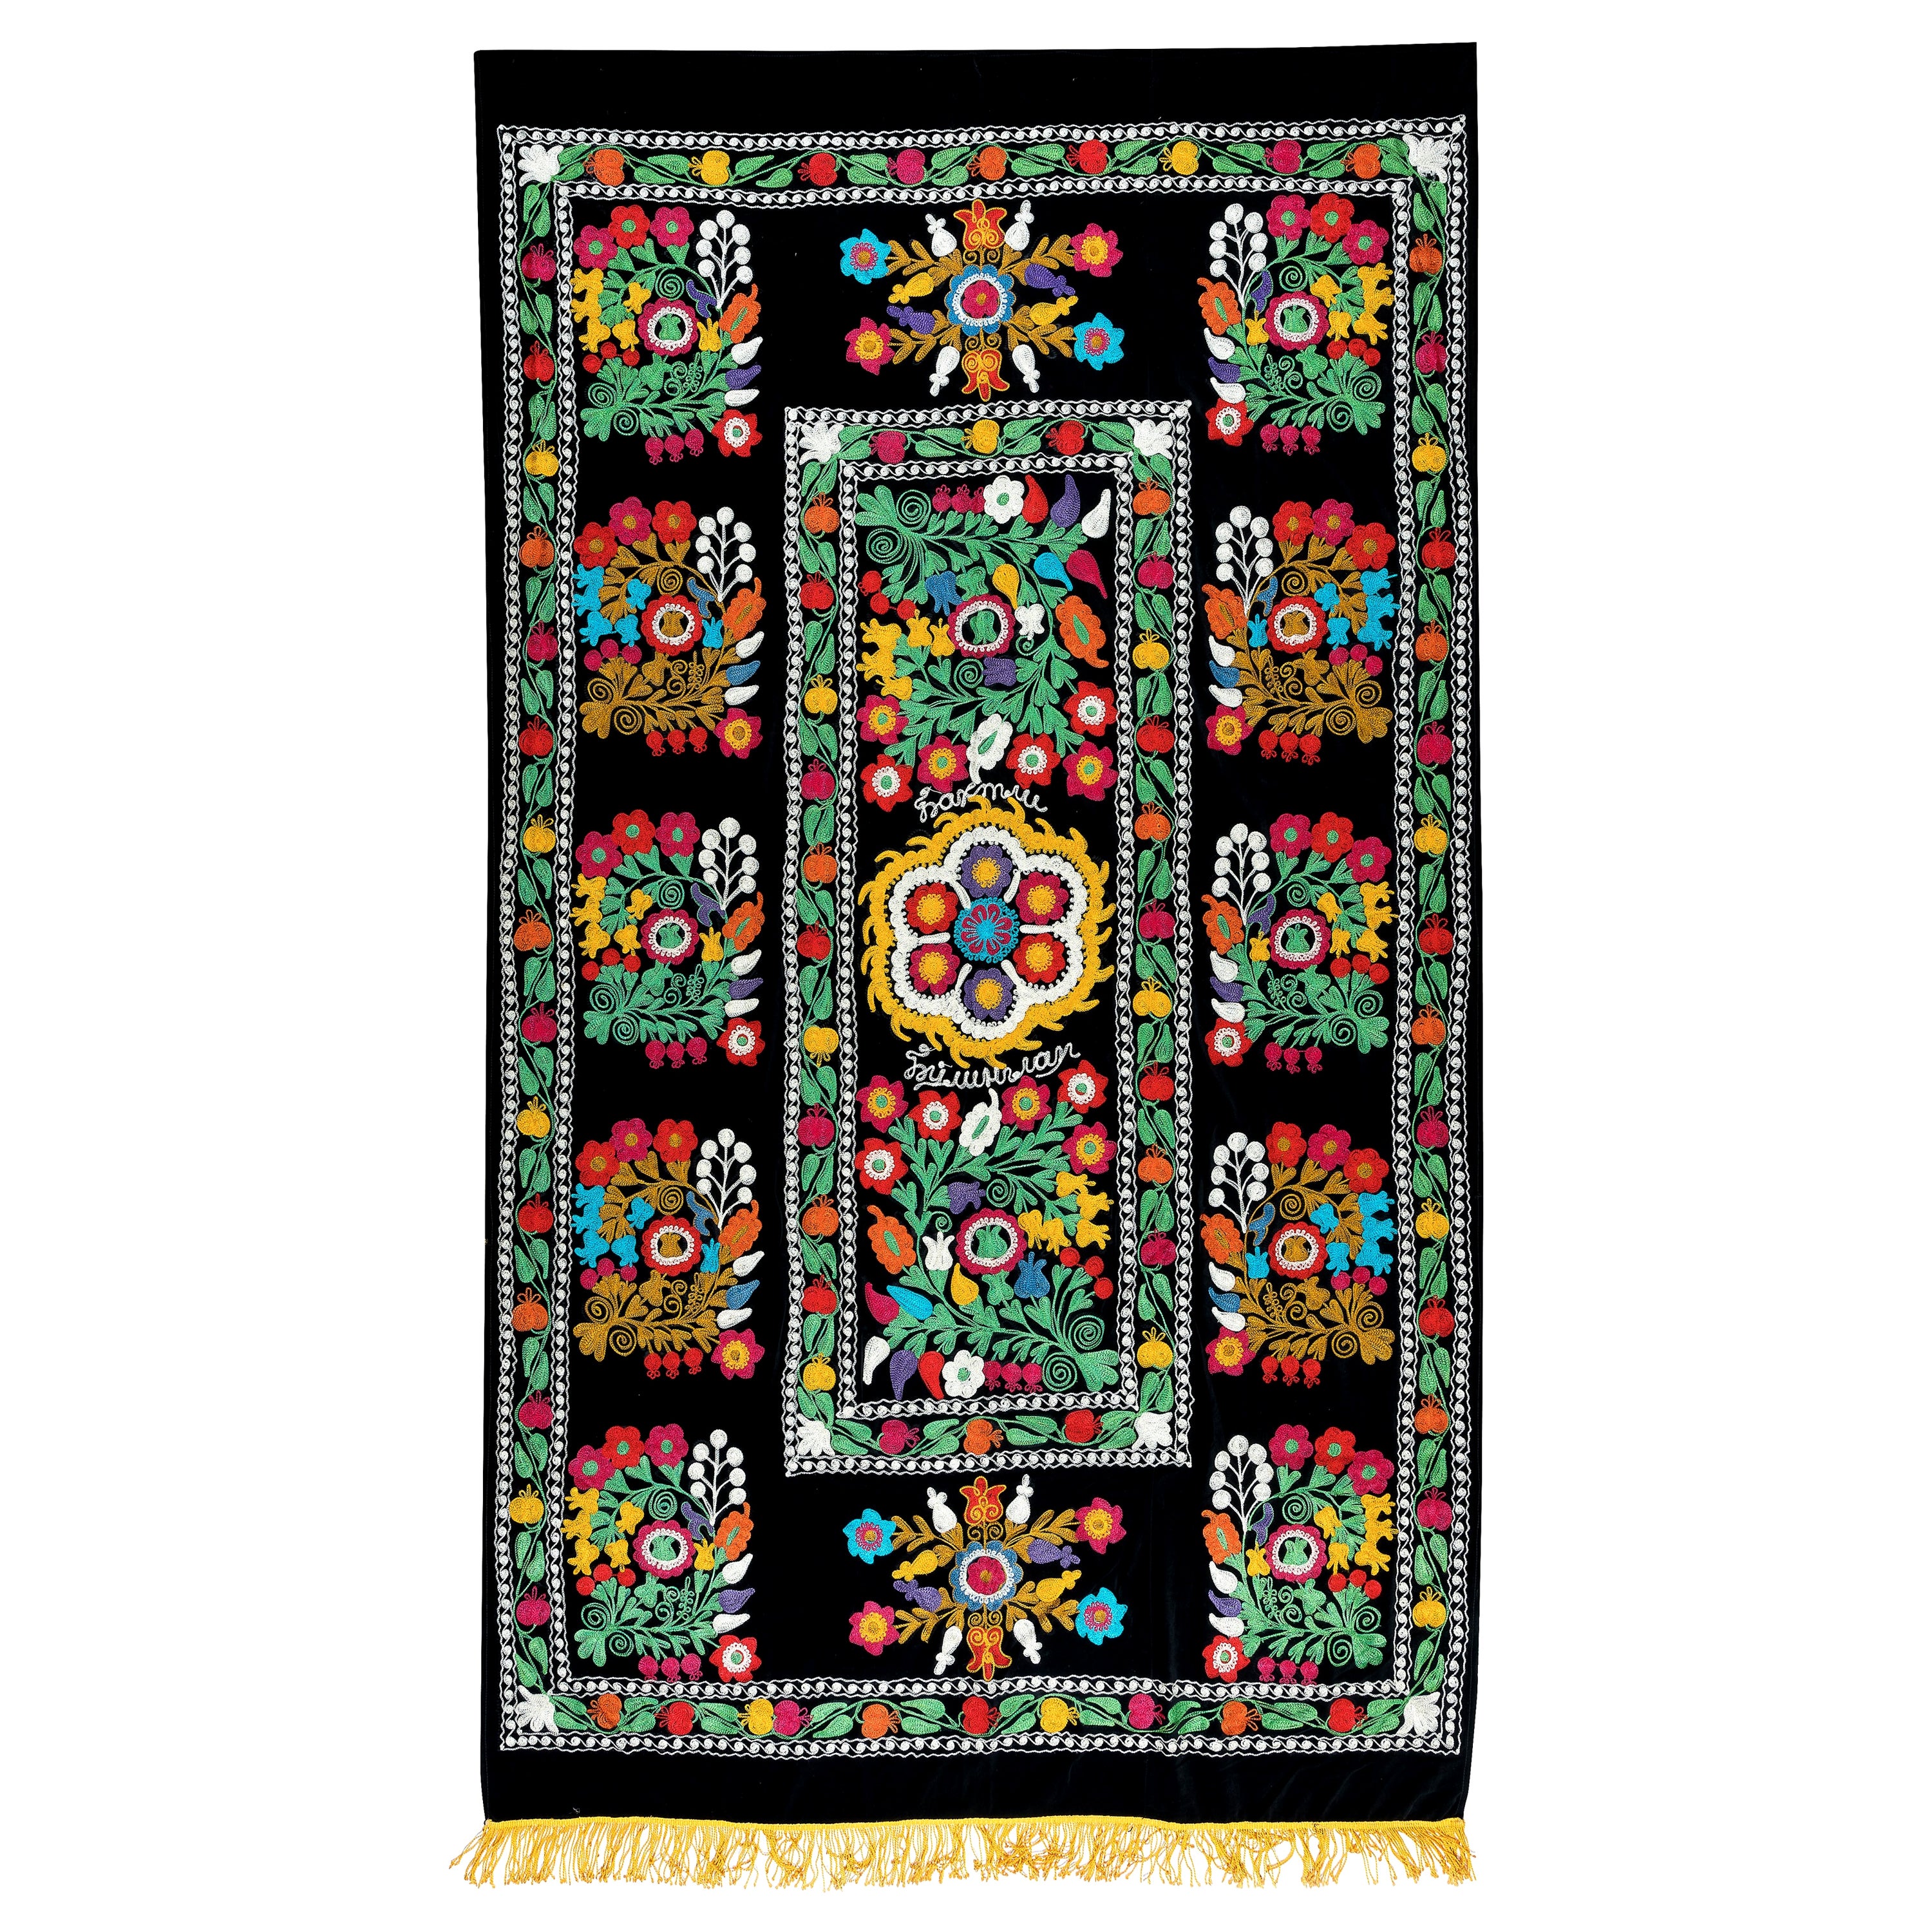 4.2x7.5 Ft Vintage Wall Hanging, Silk Embroidery Wall Hanging, Black Tablecloth